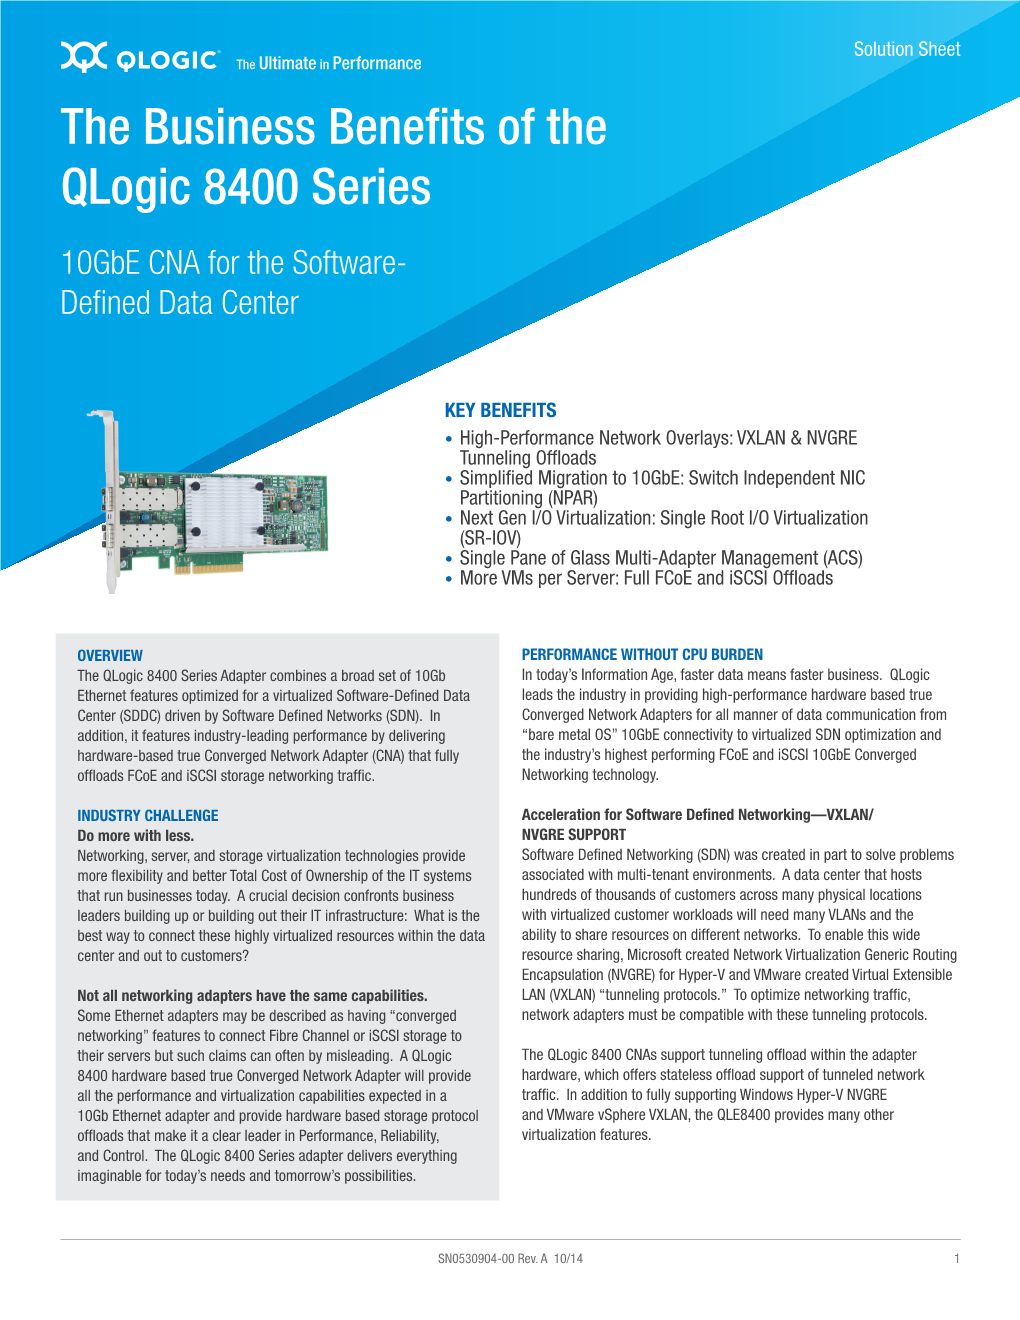 The Business Benefits of the Qlogic 8400 Series 10Gbe CNA for the Software- Defined Data Center